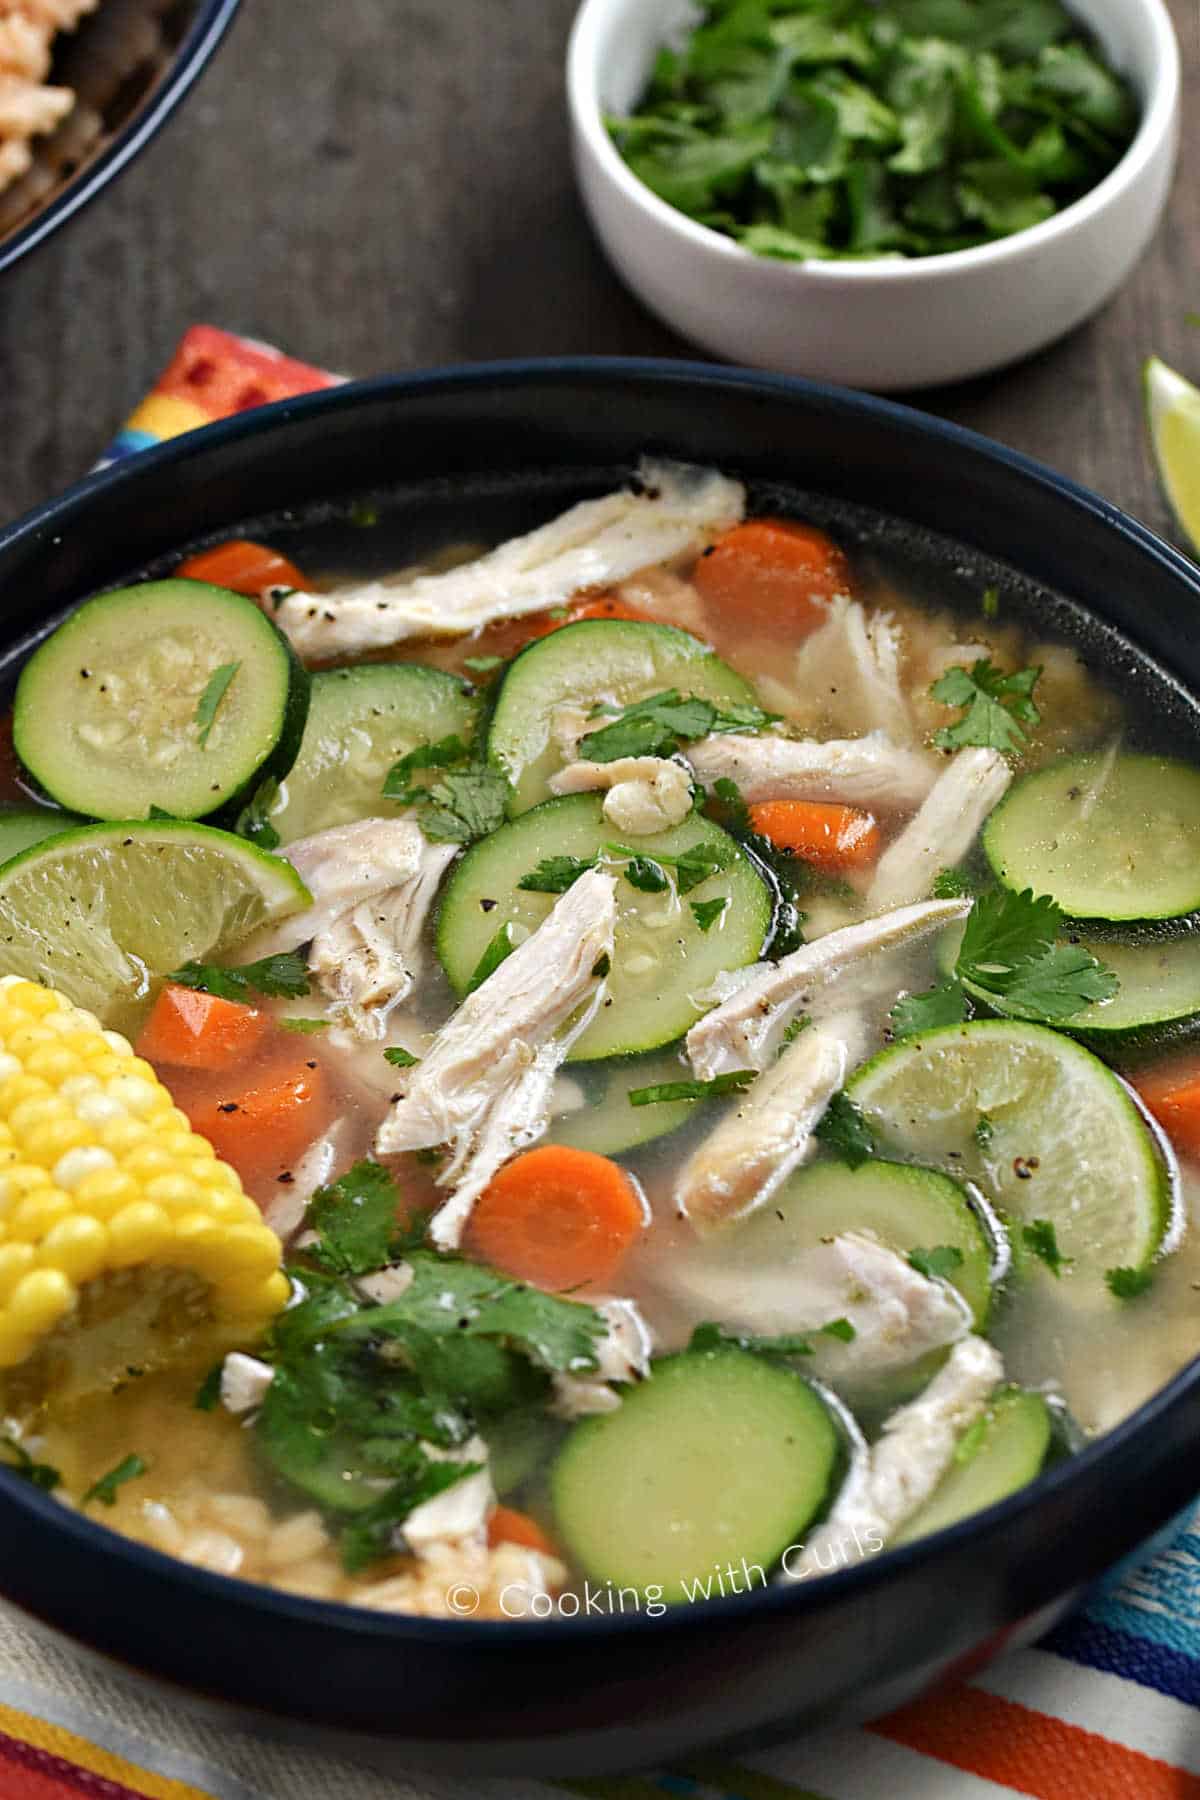 Chicken, sliced zucchini, carrots, and corn on the cob in a bowl.